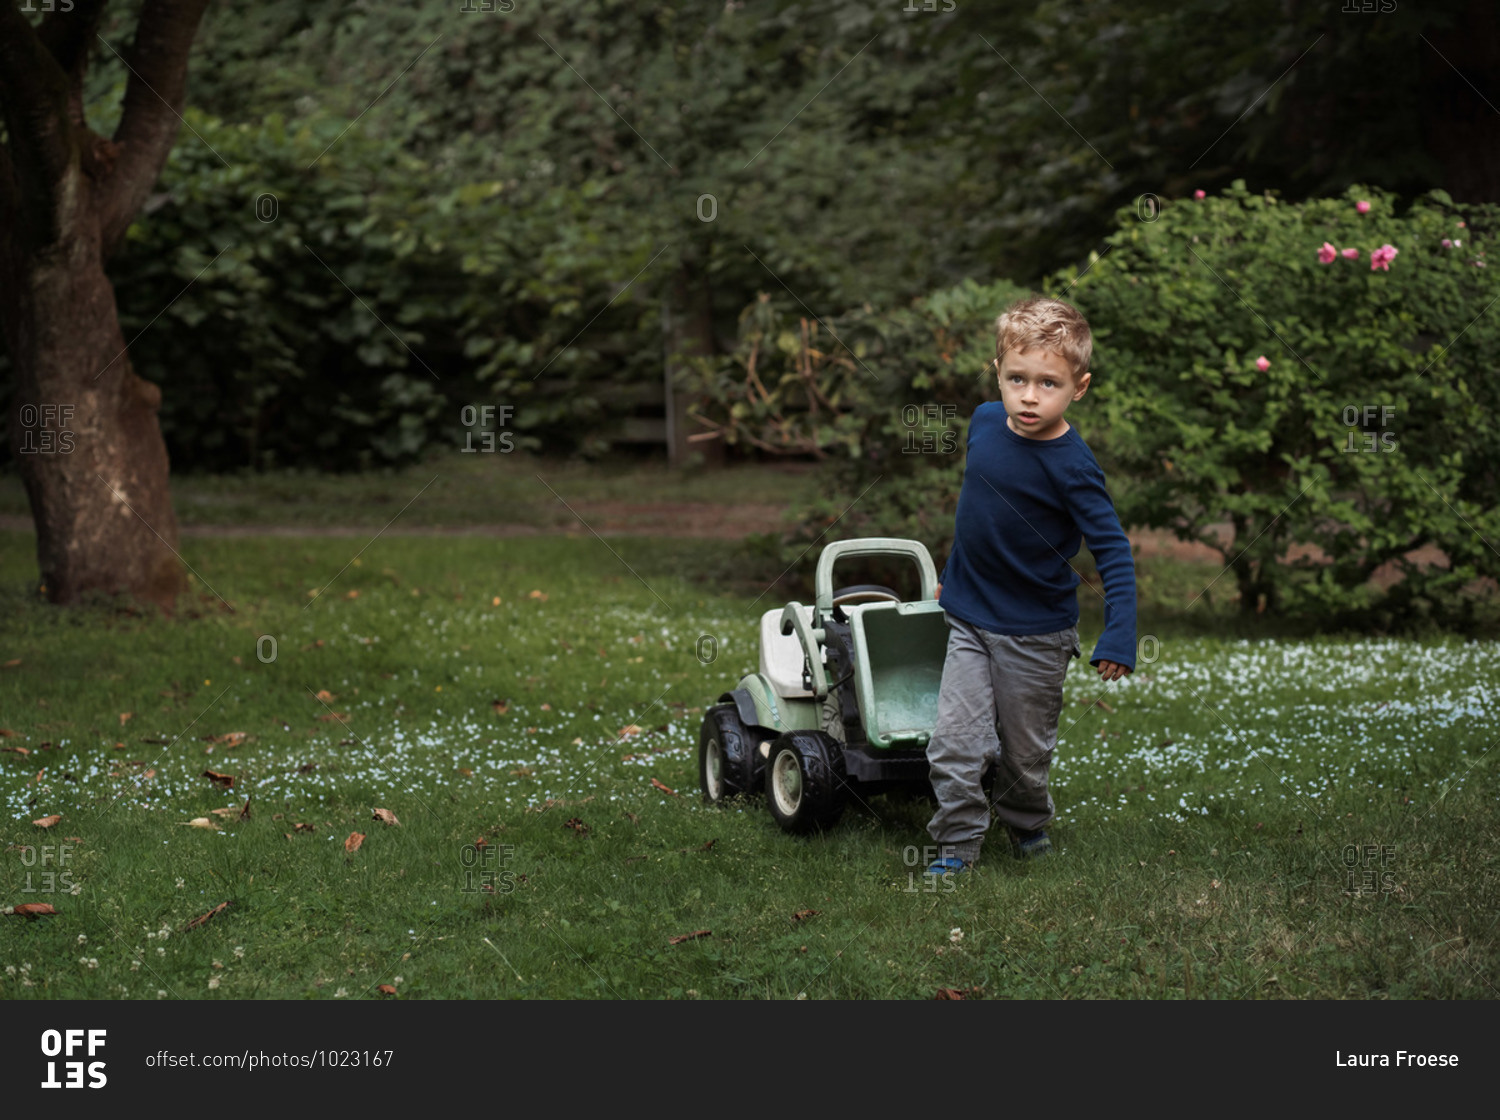 Child pulling a ride-on tractor through the yard